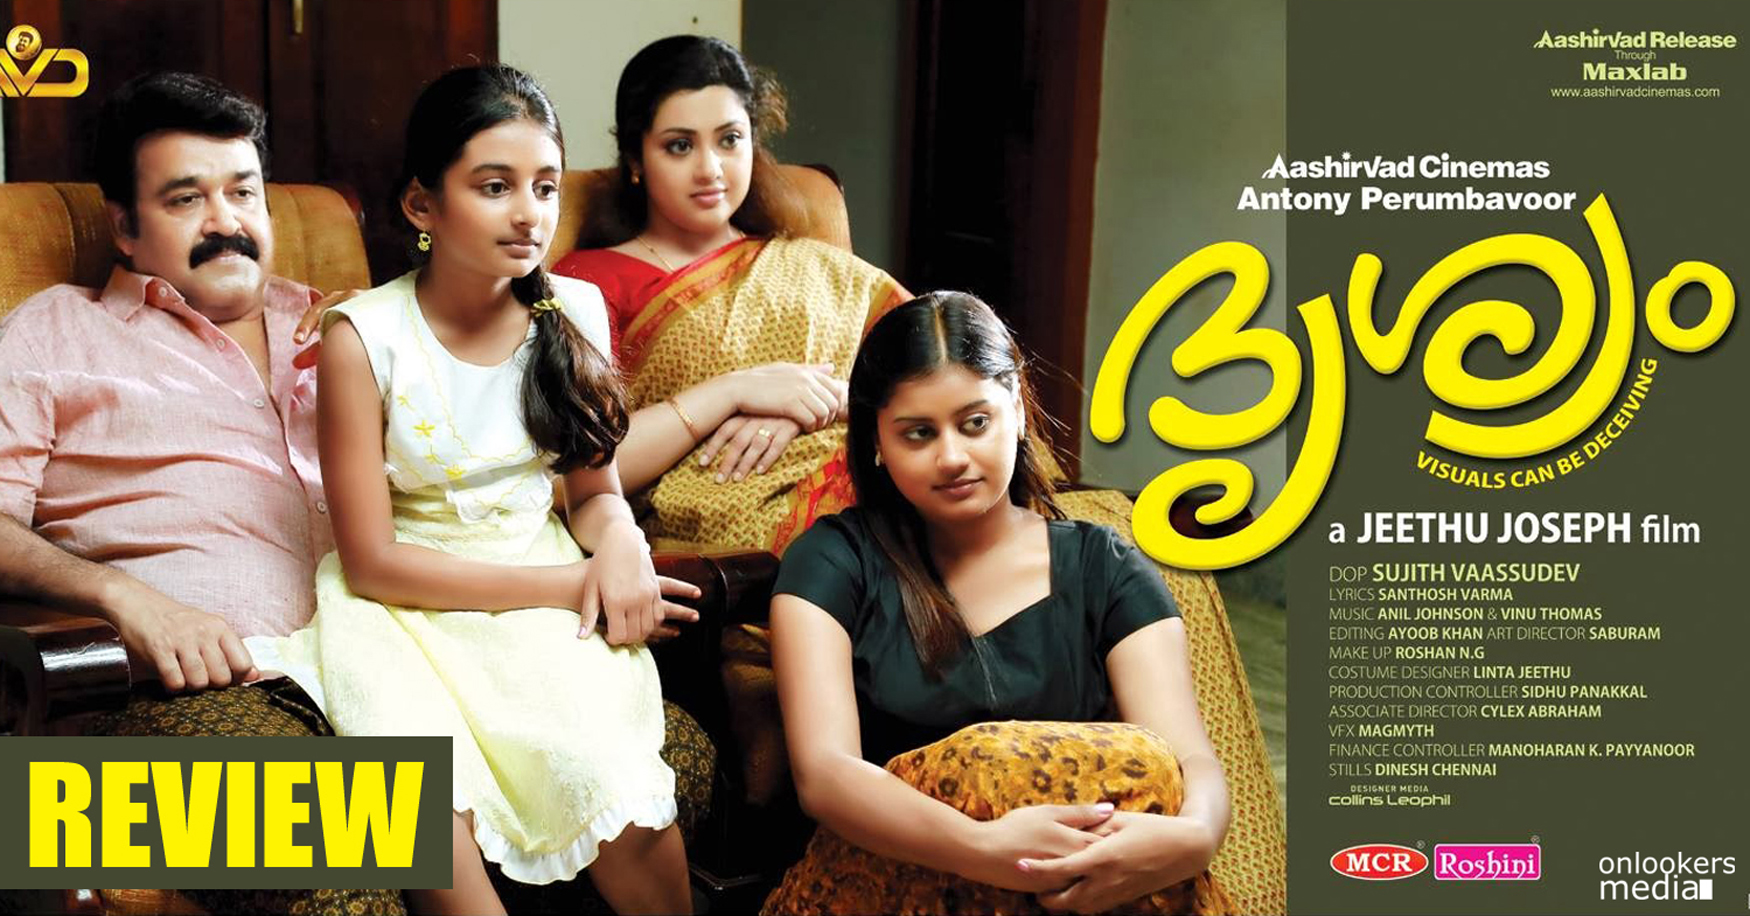 Drishyam Review-Report-Collection-Mohanlal-Jeethu Joseph-Malayalam Movie 2013-Onlookers Media